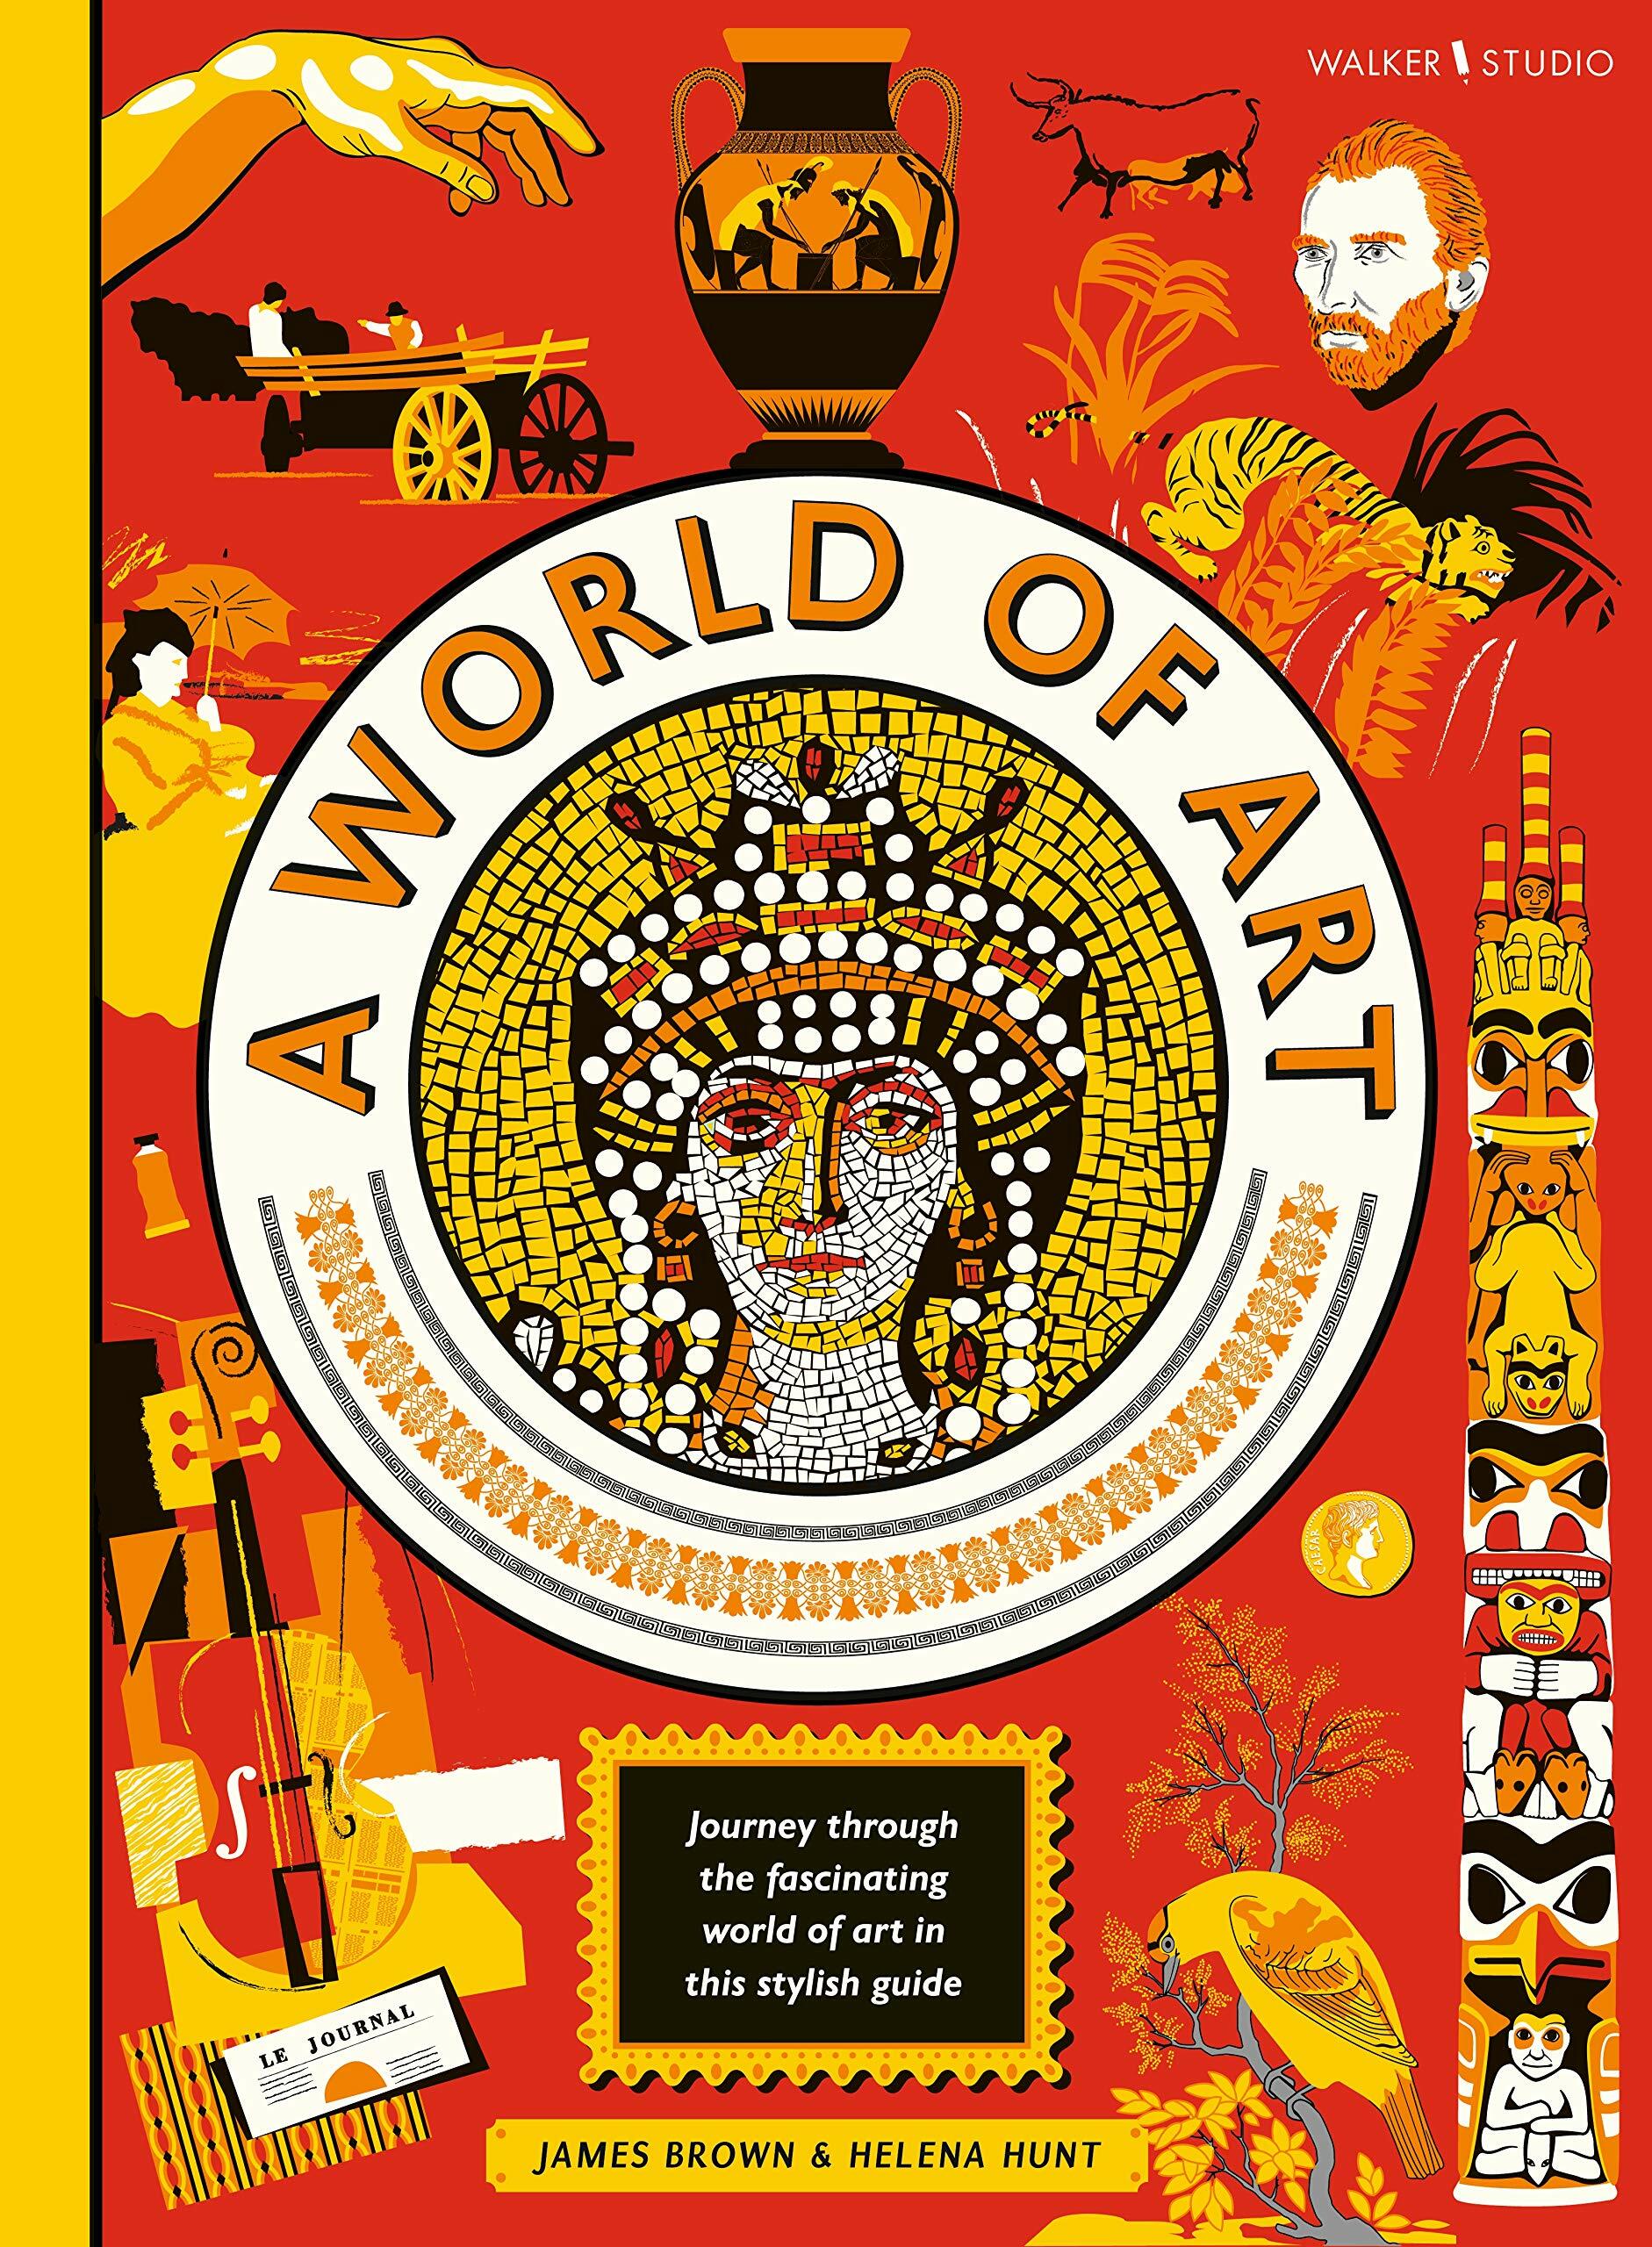 A World of Art (Hardcover)